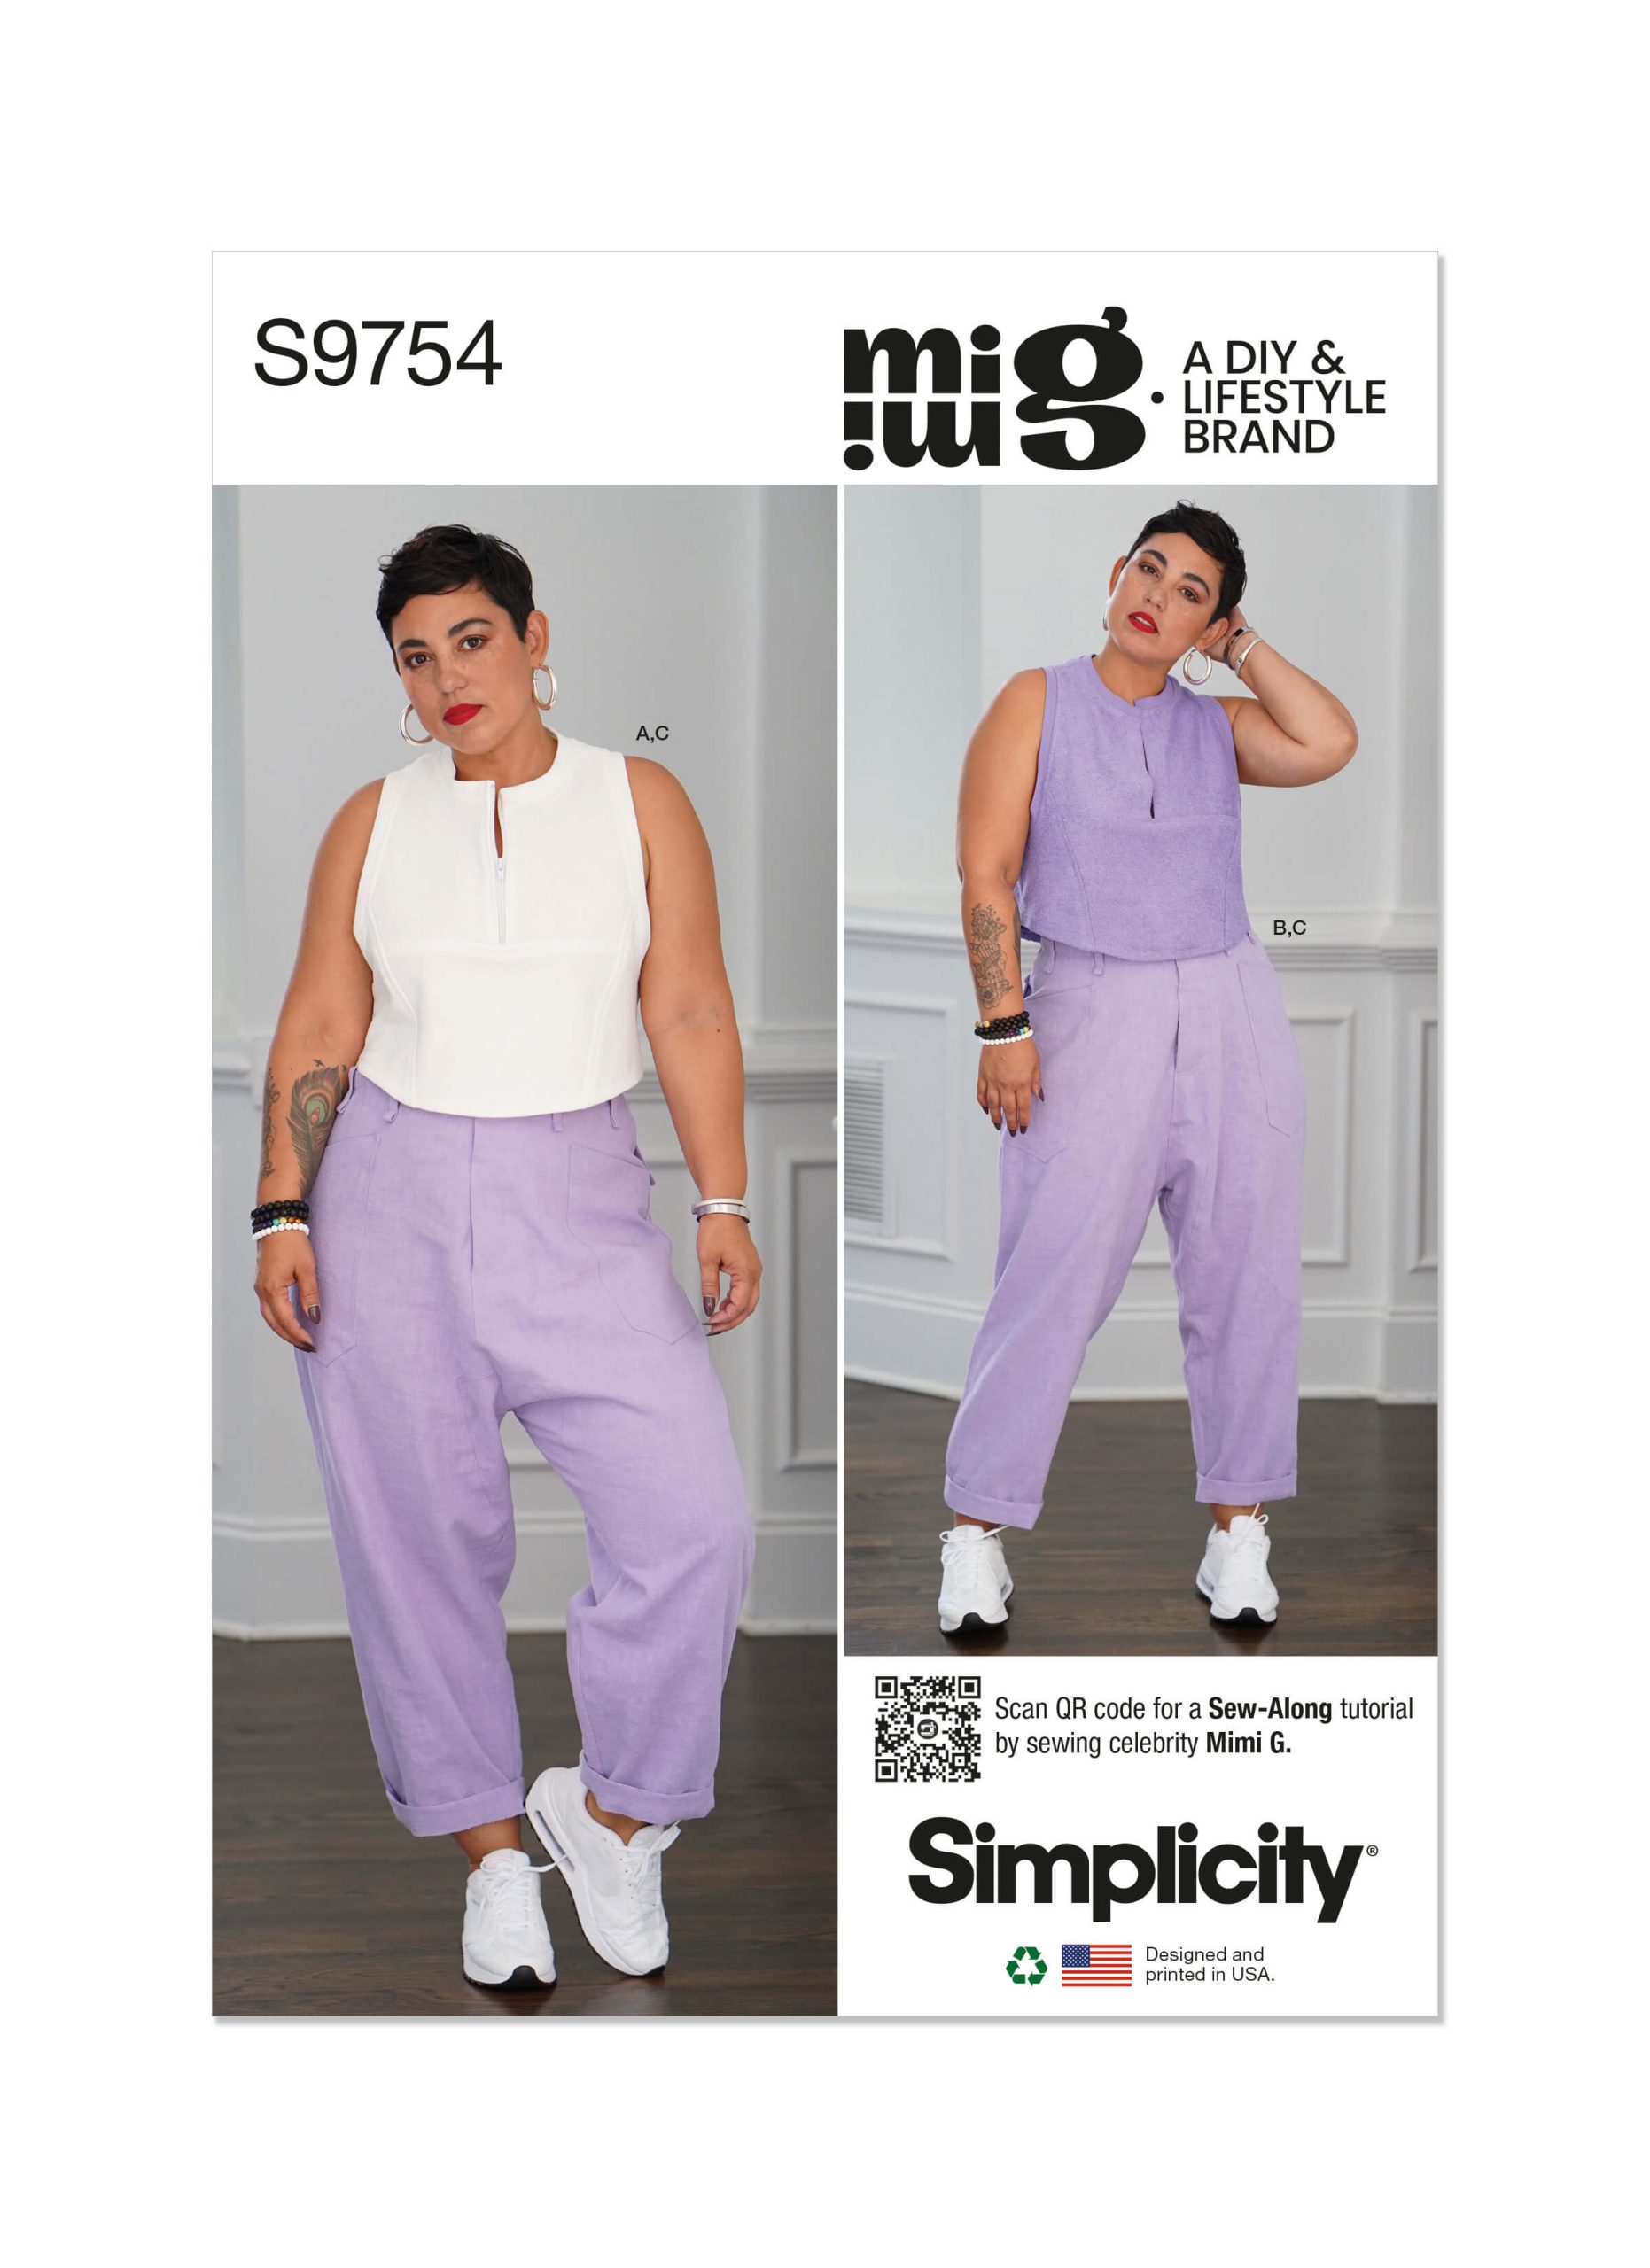 Simplicity Sewing Pattern S9754 Misses' Tops and Cargo Pants by